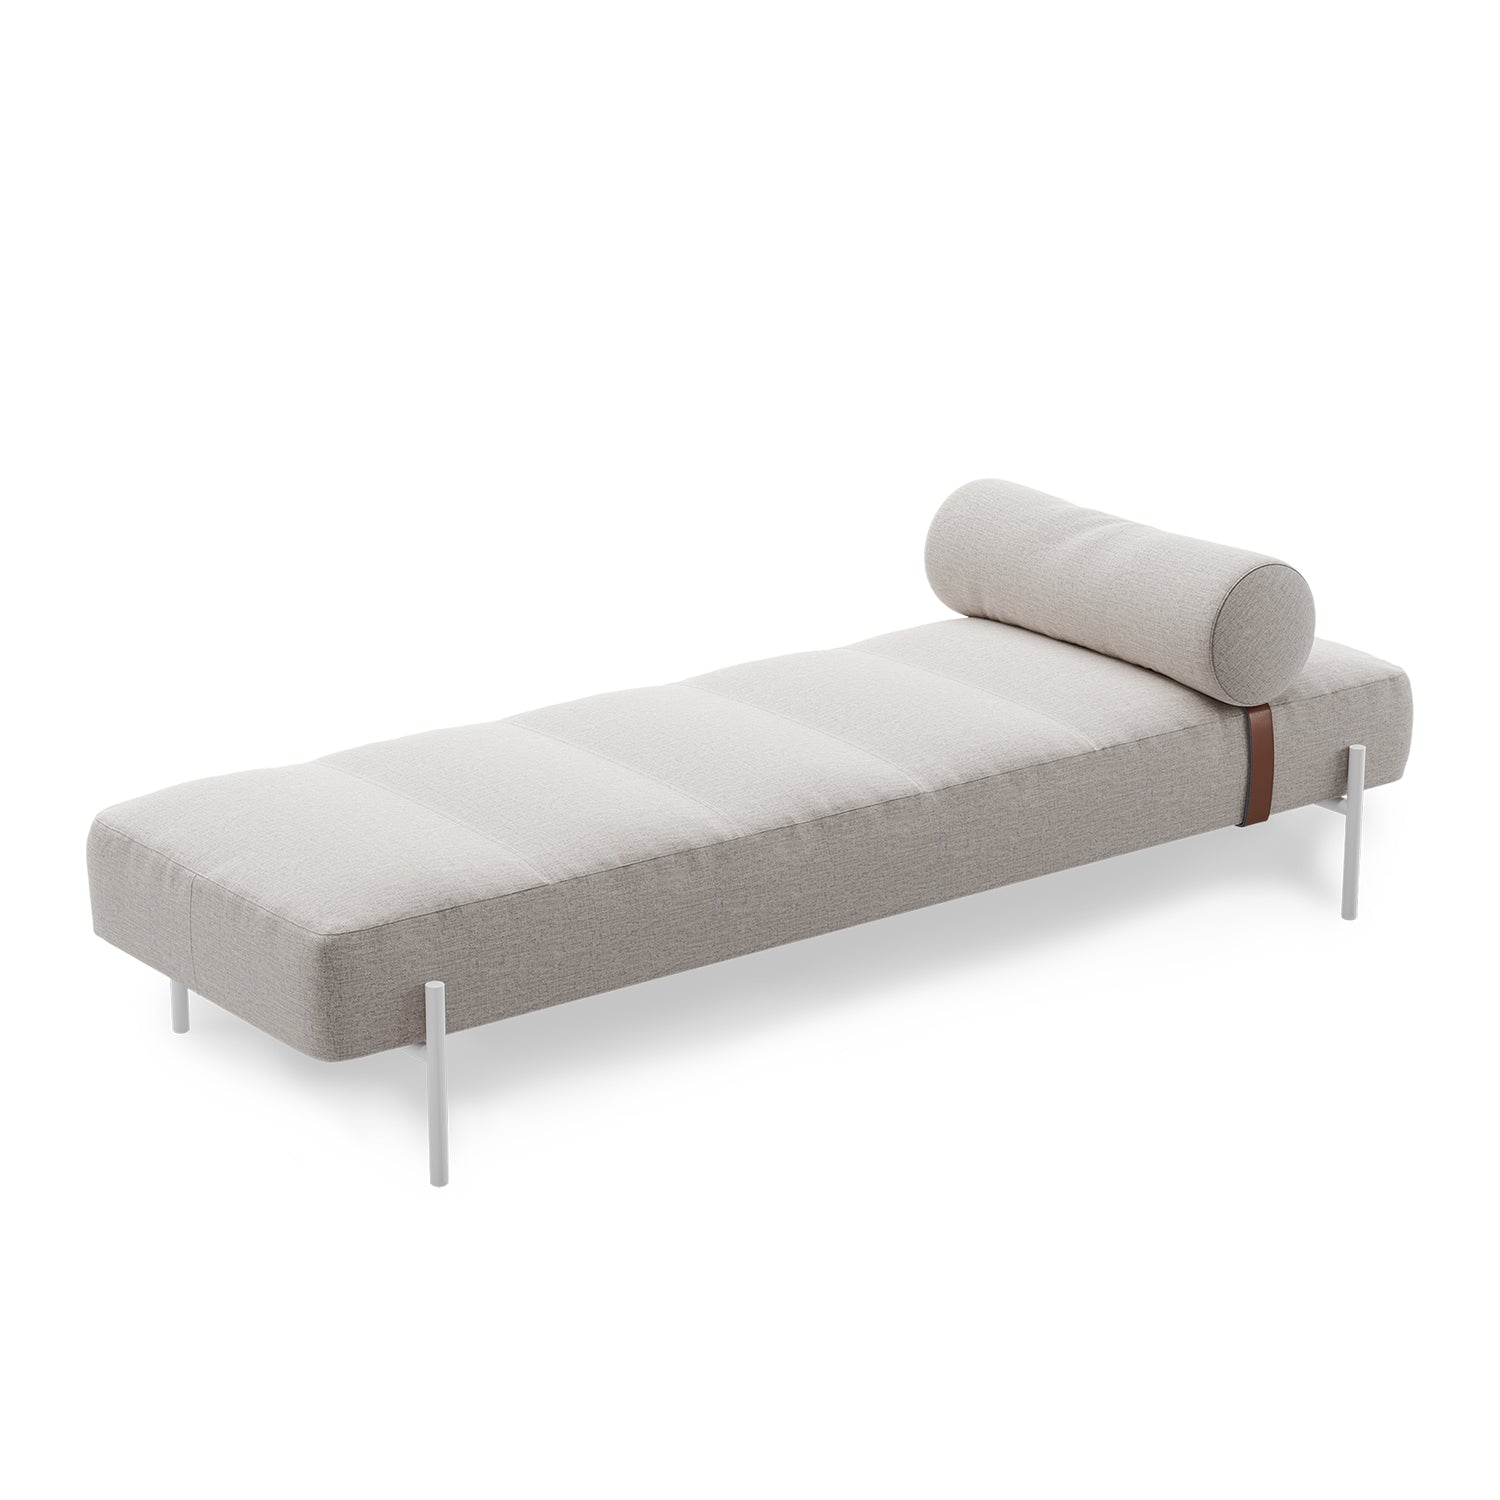 Northern Daybe Daybed in brusvik 02 and White legs